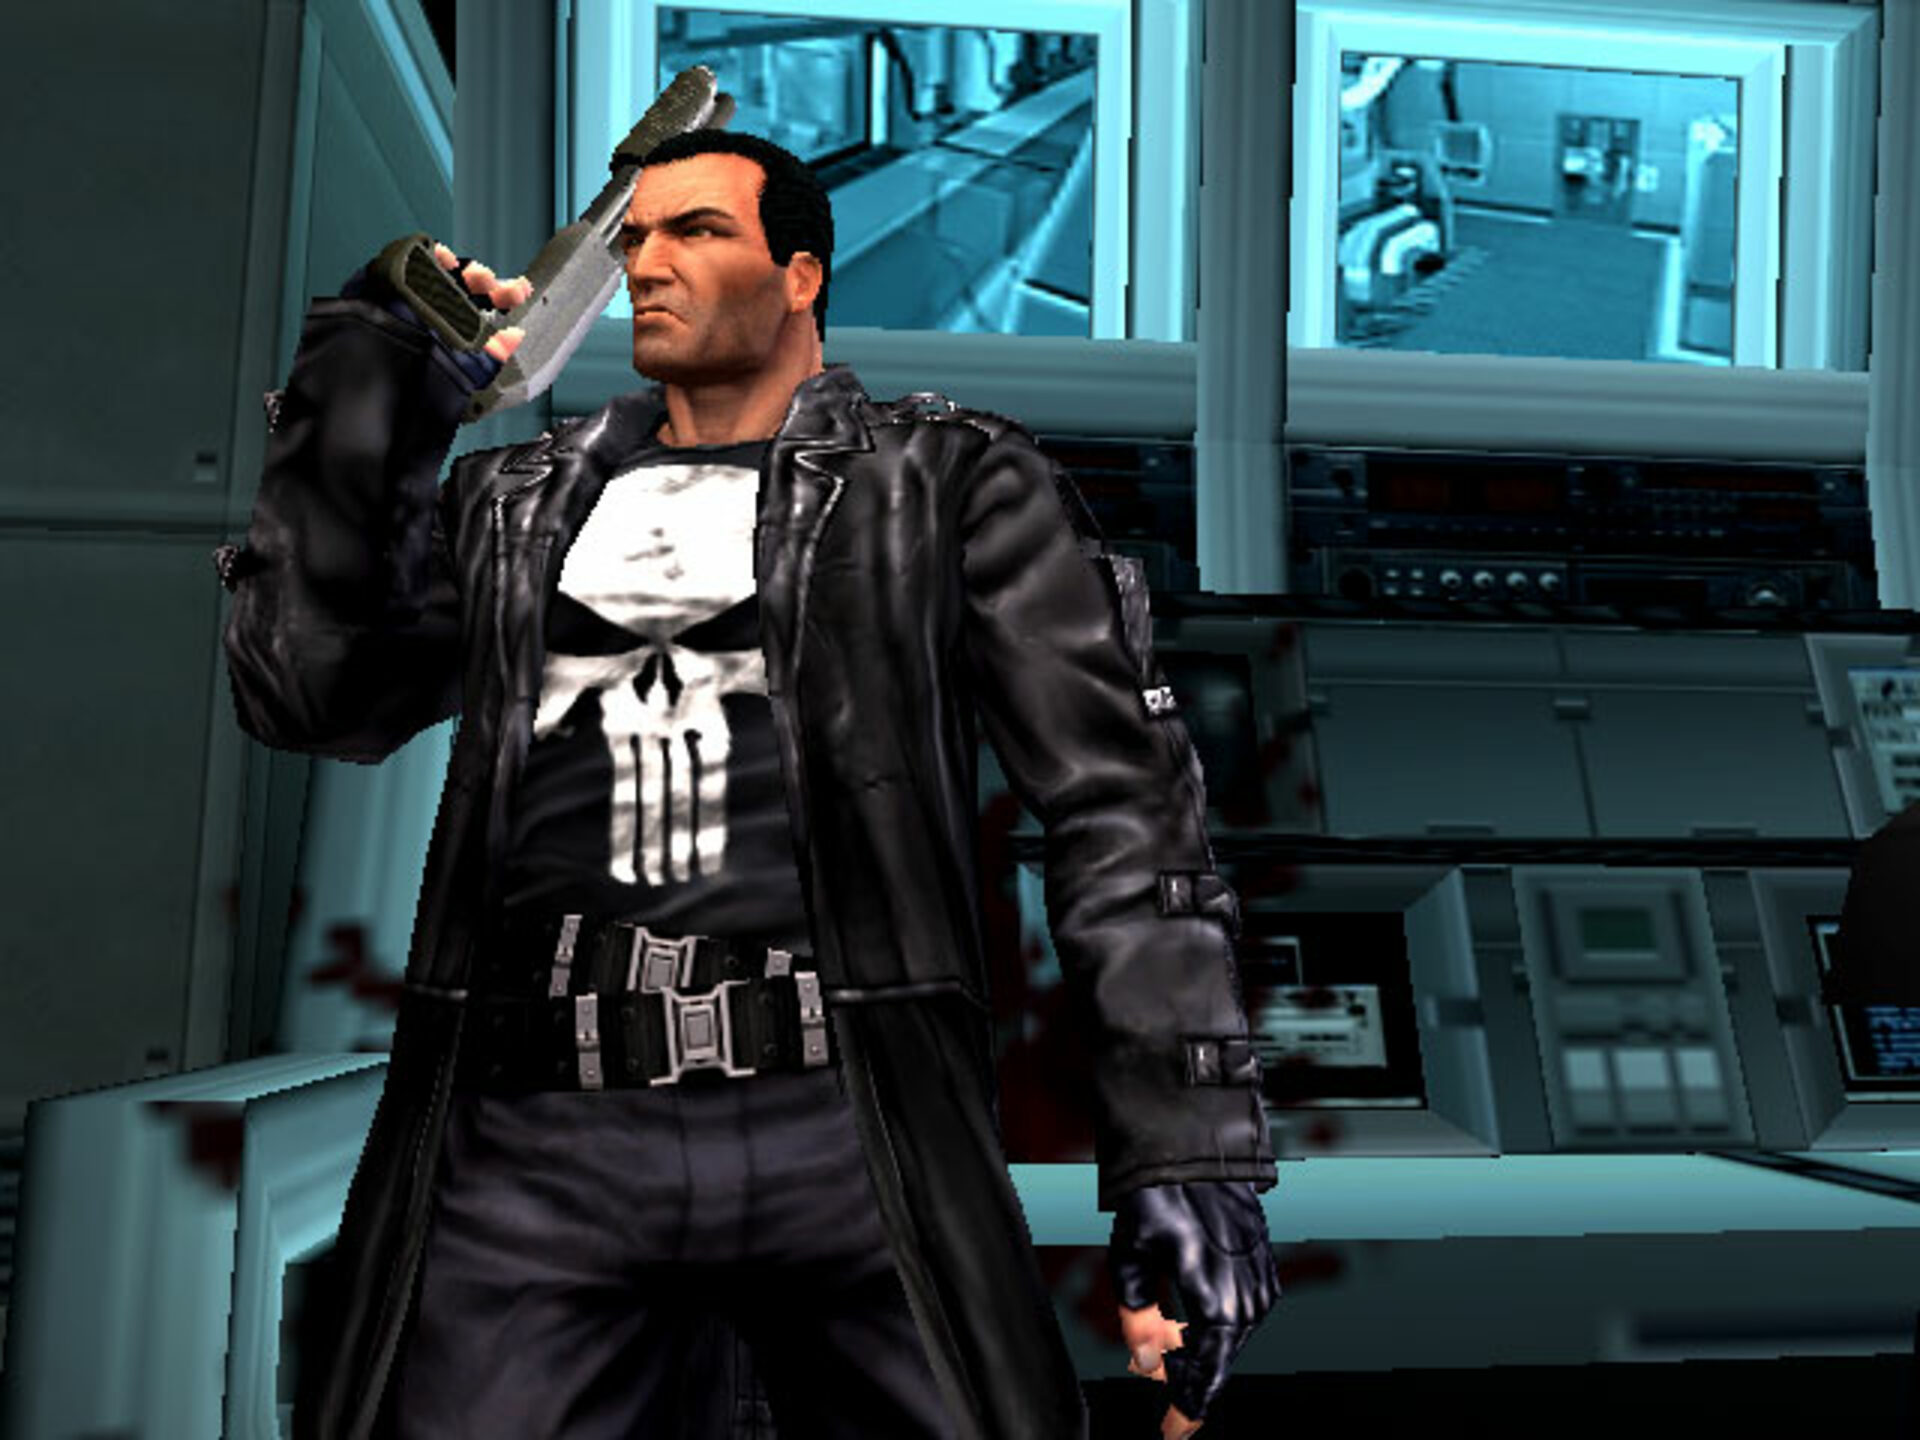 Buy The Punisher for PS2